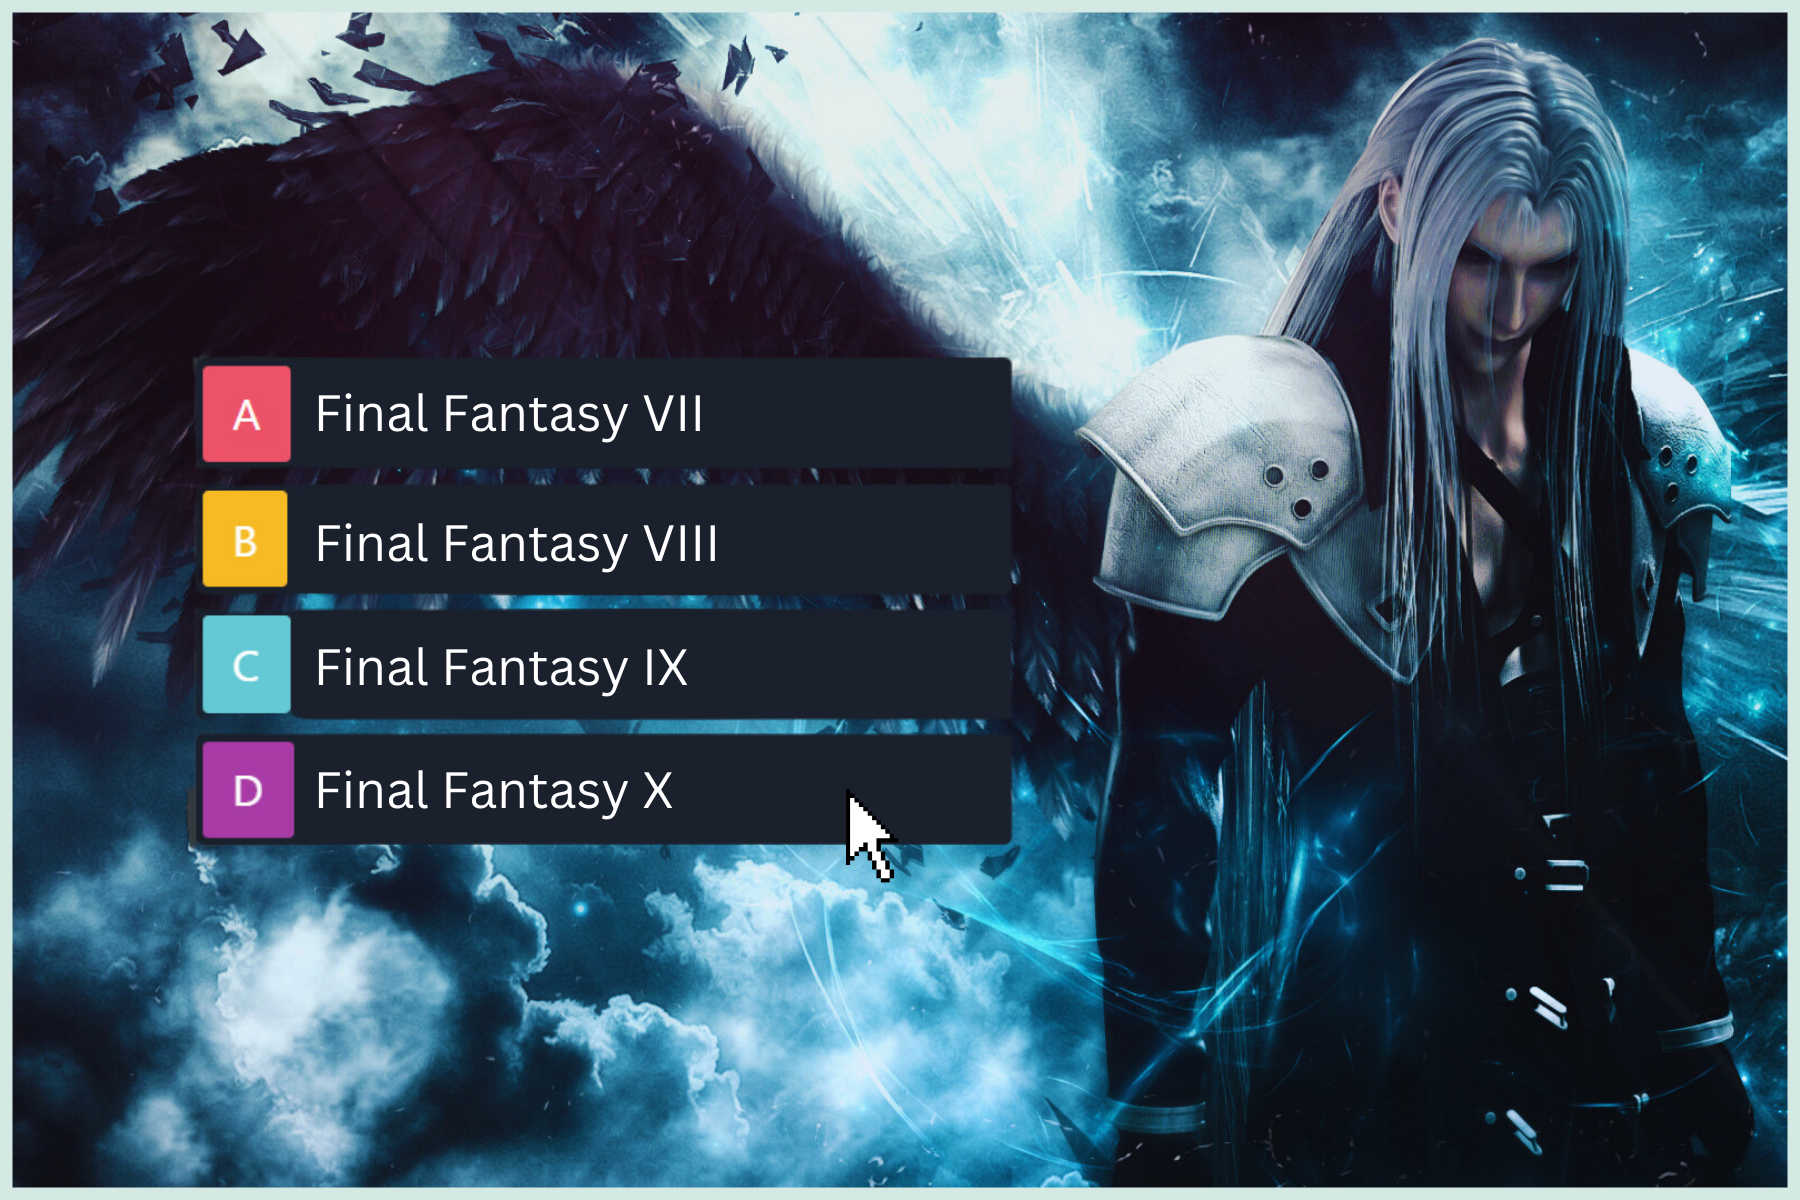 Can You Match the Final Fantasy Character to the Correct FF Game?